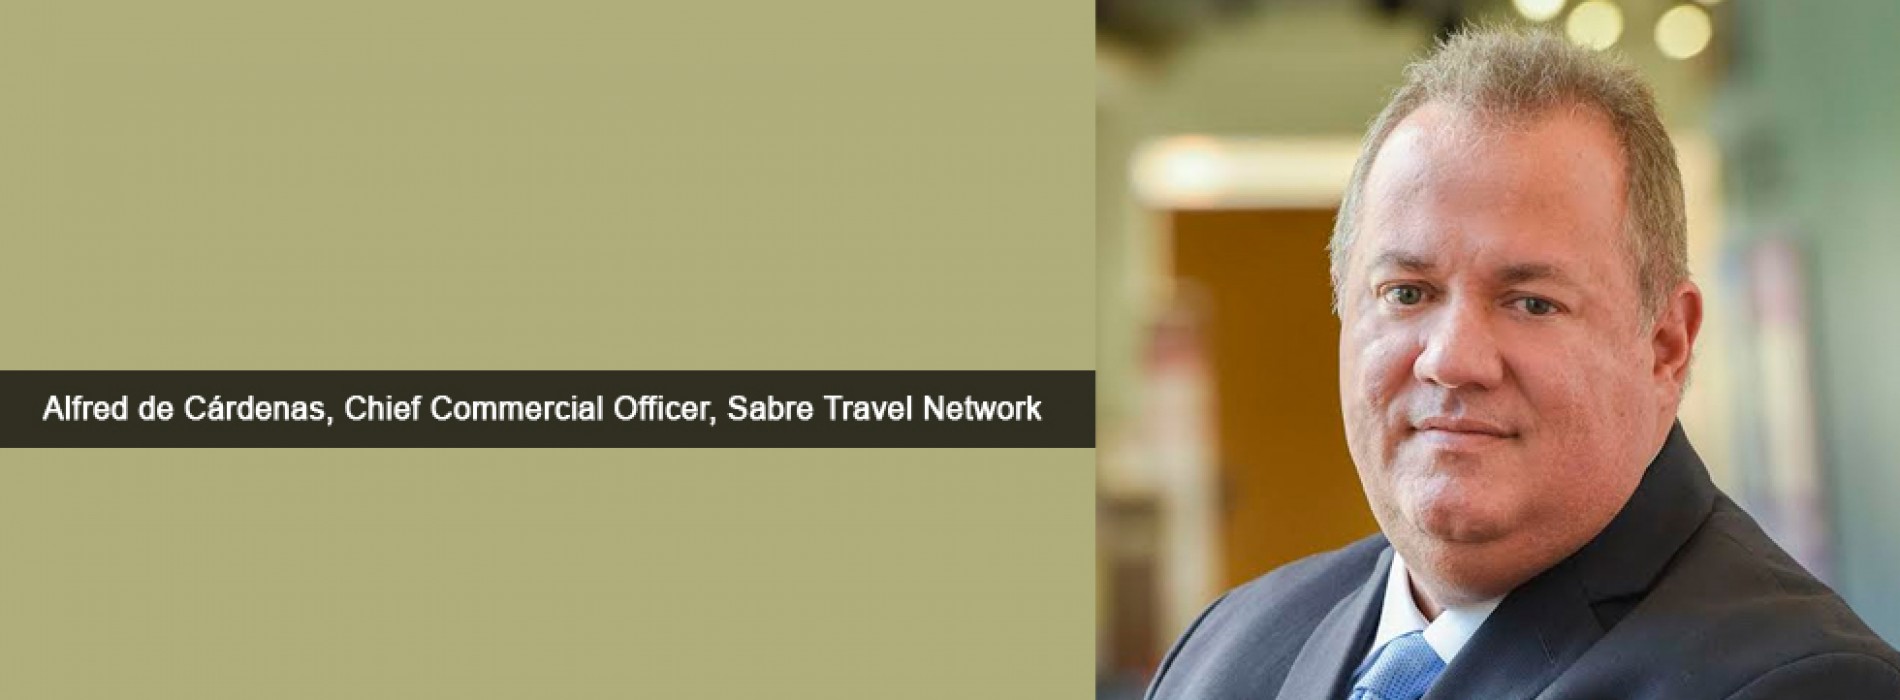 Sabre appoints Alfred de Cárdenas as Chief Commercial Officer for Travel Network